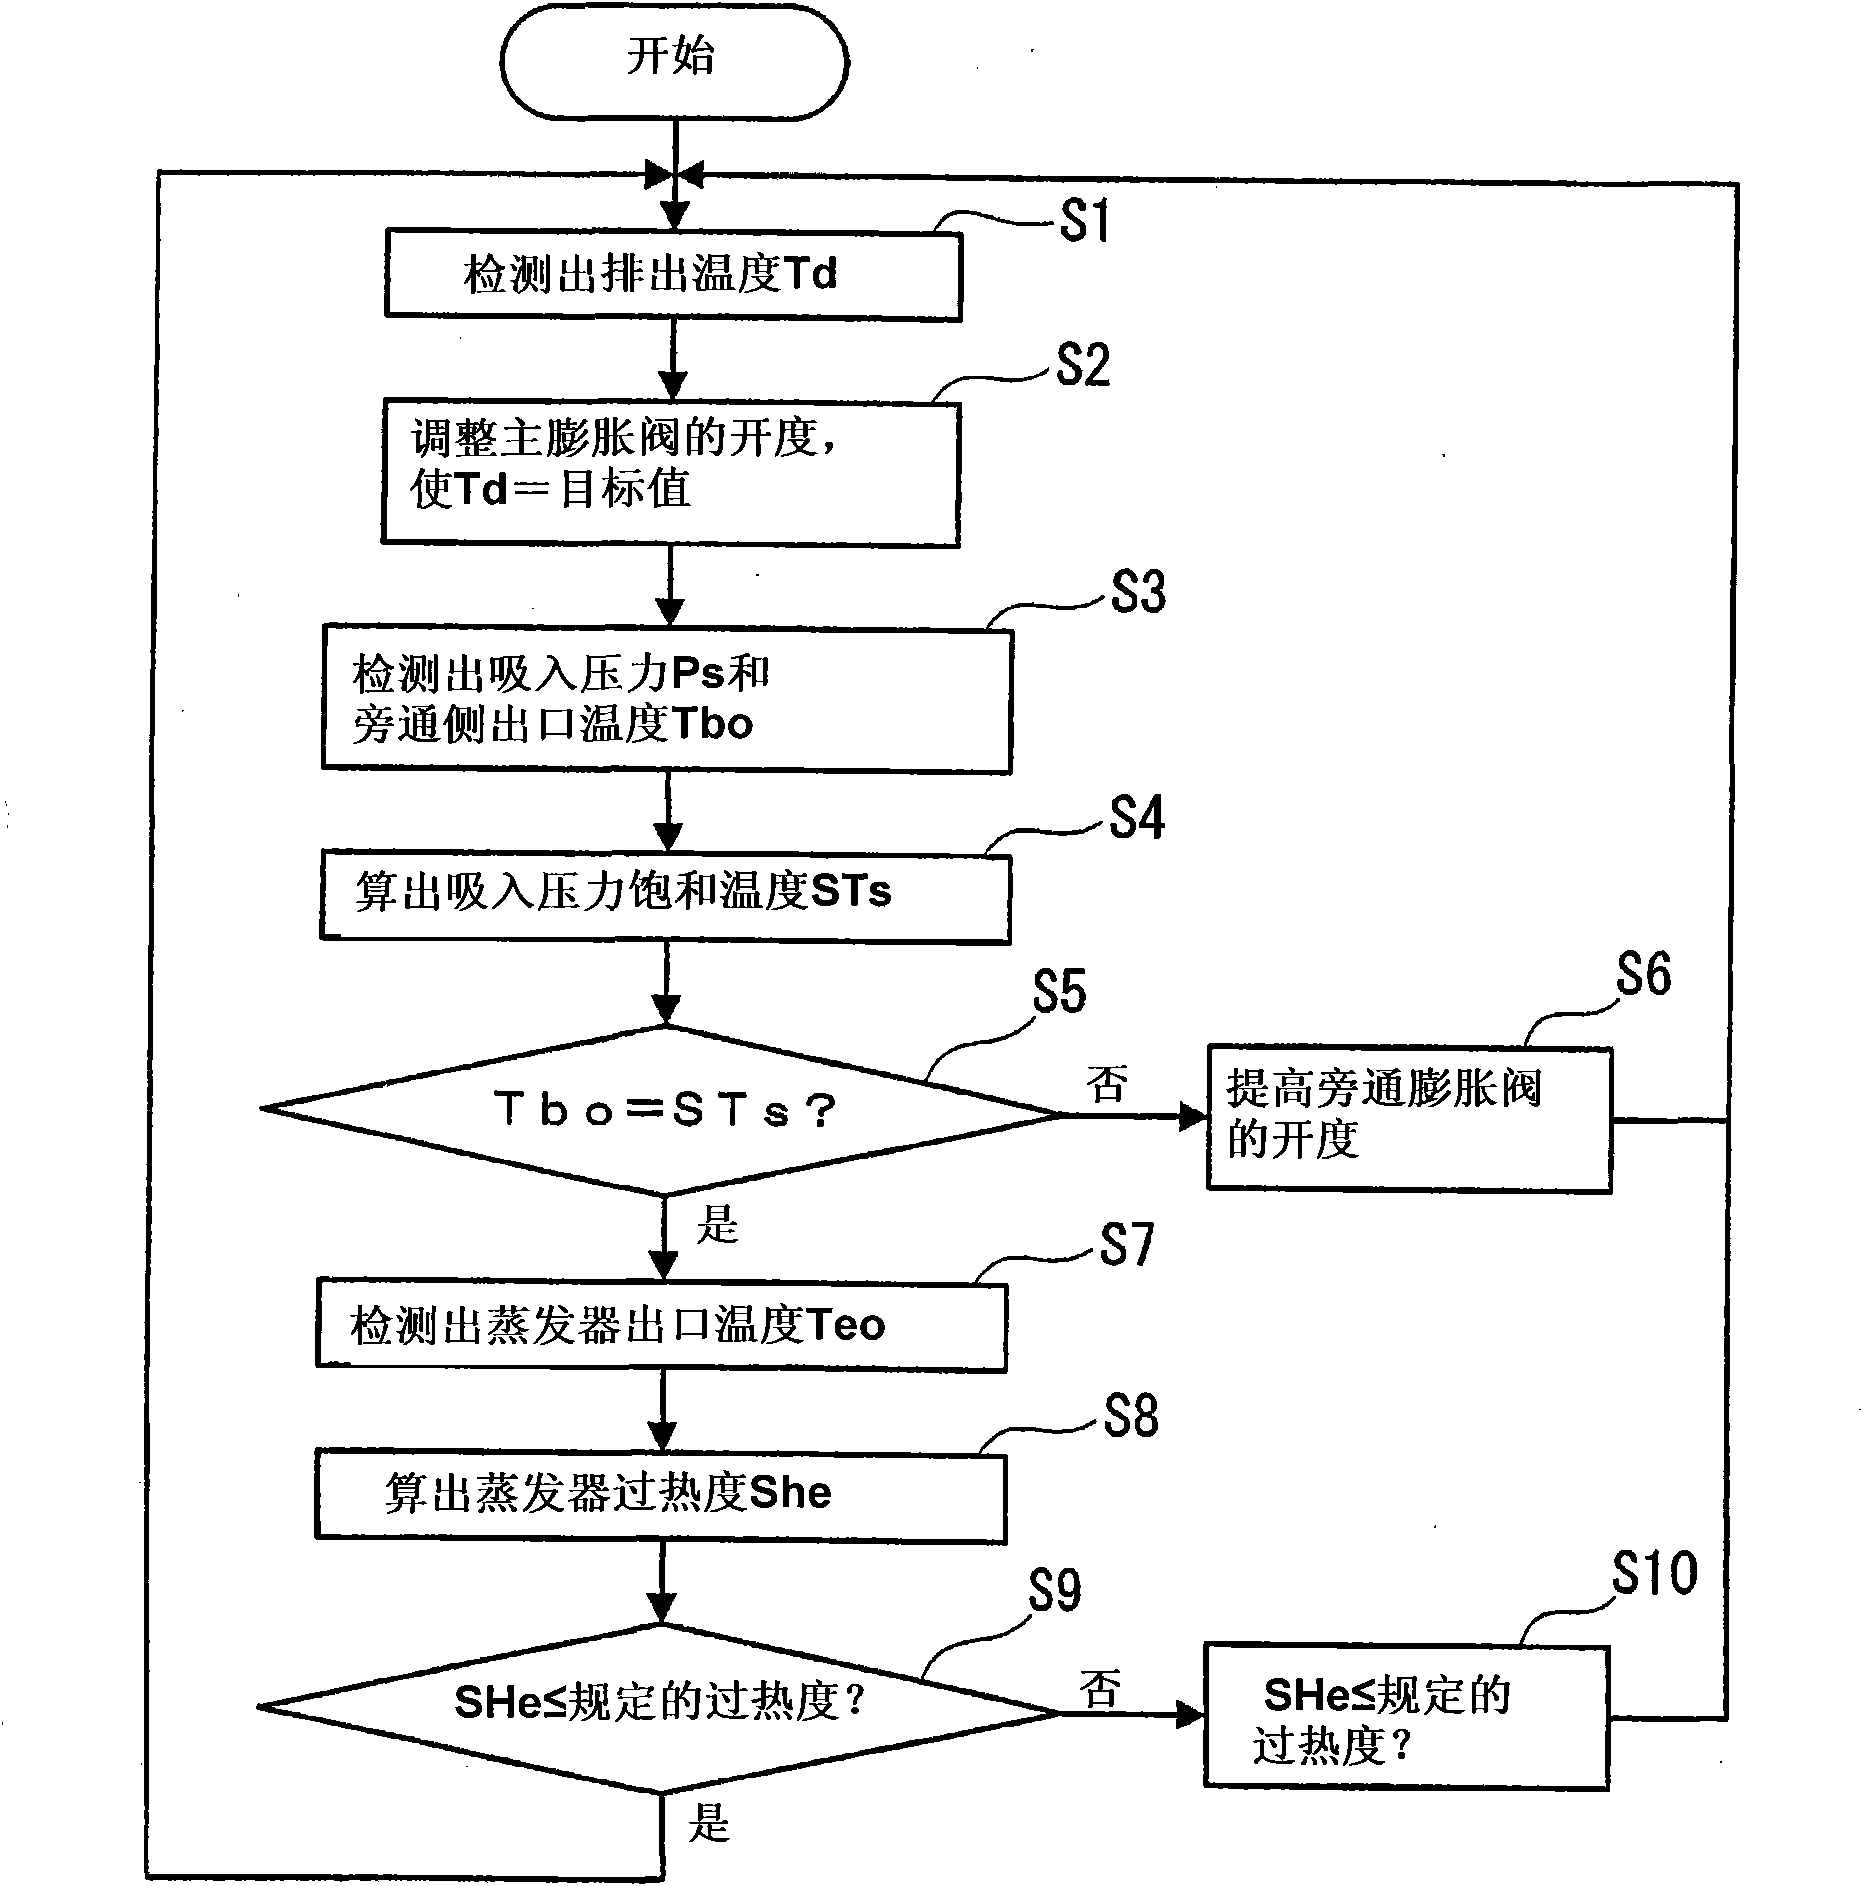 Refrigeration cycle apparatus and hot water heater